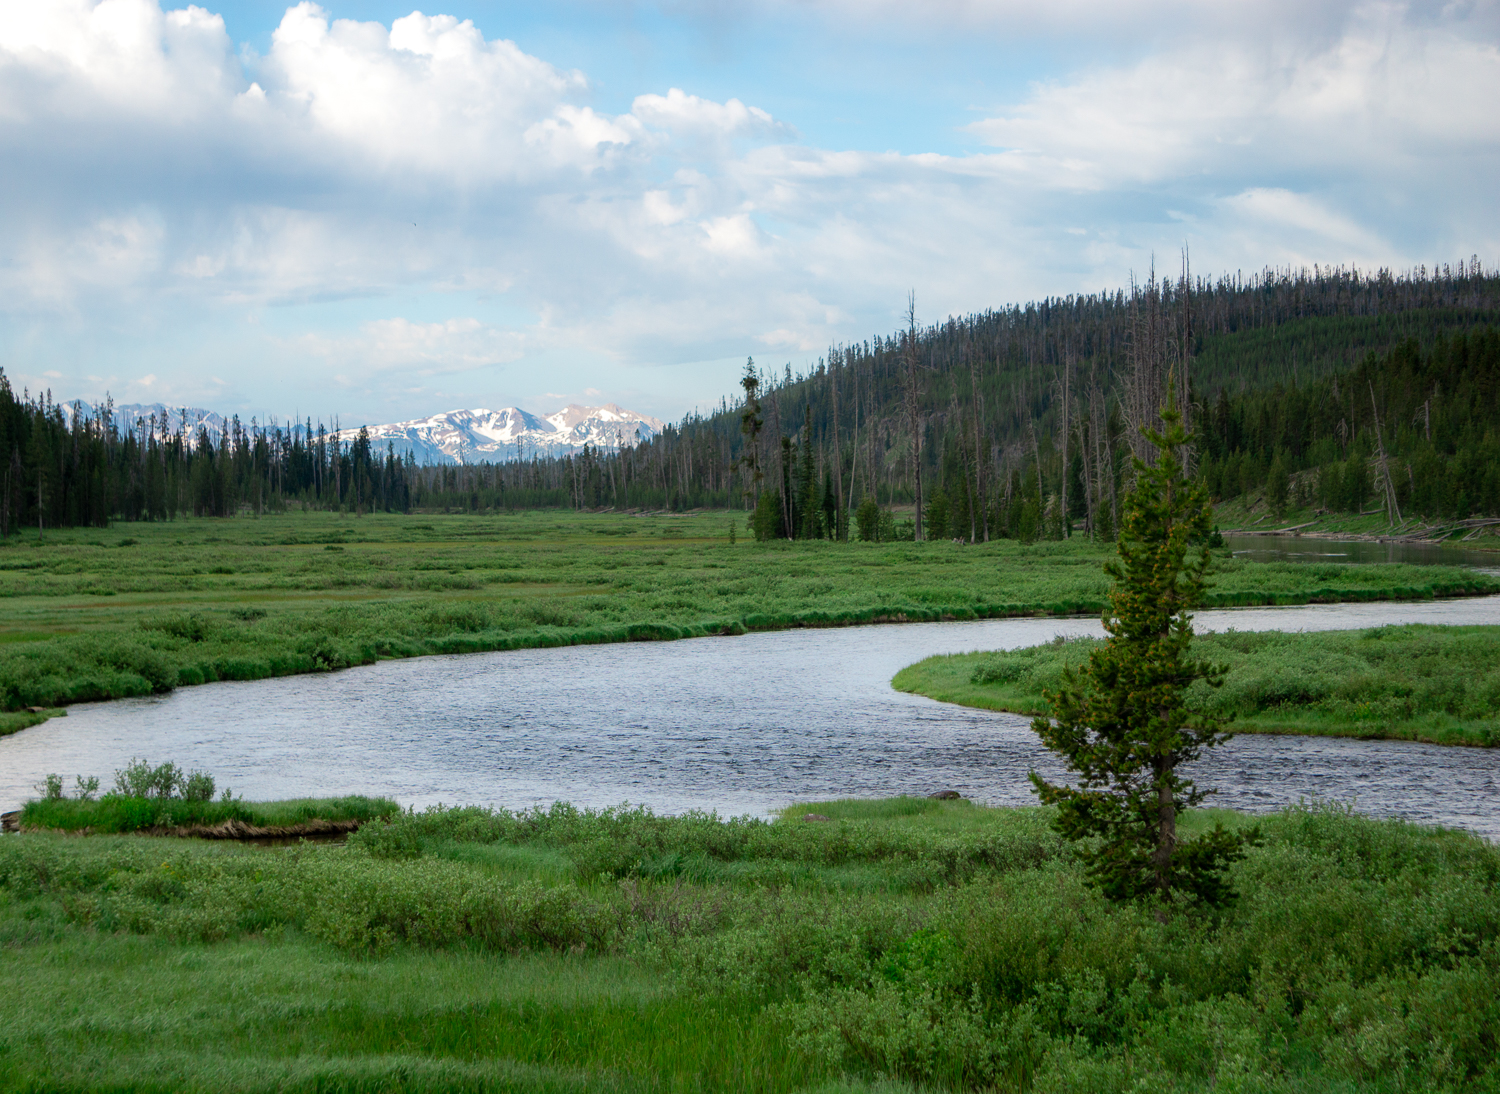 River and grassy field with Teton mountains in background